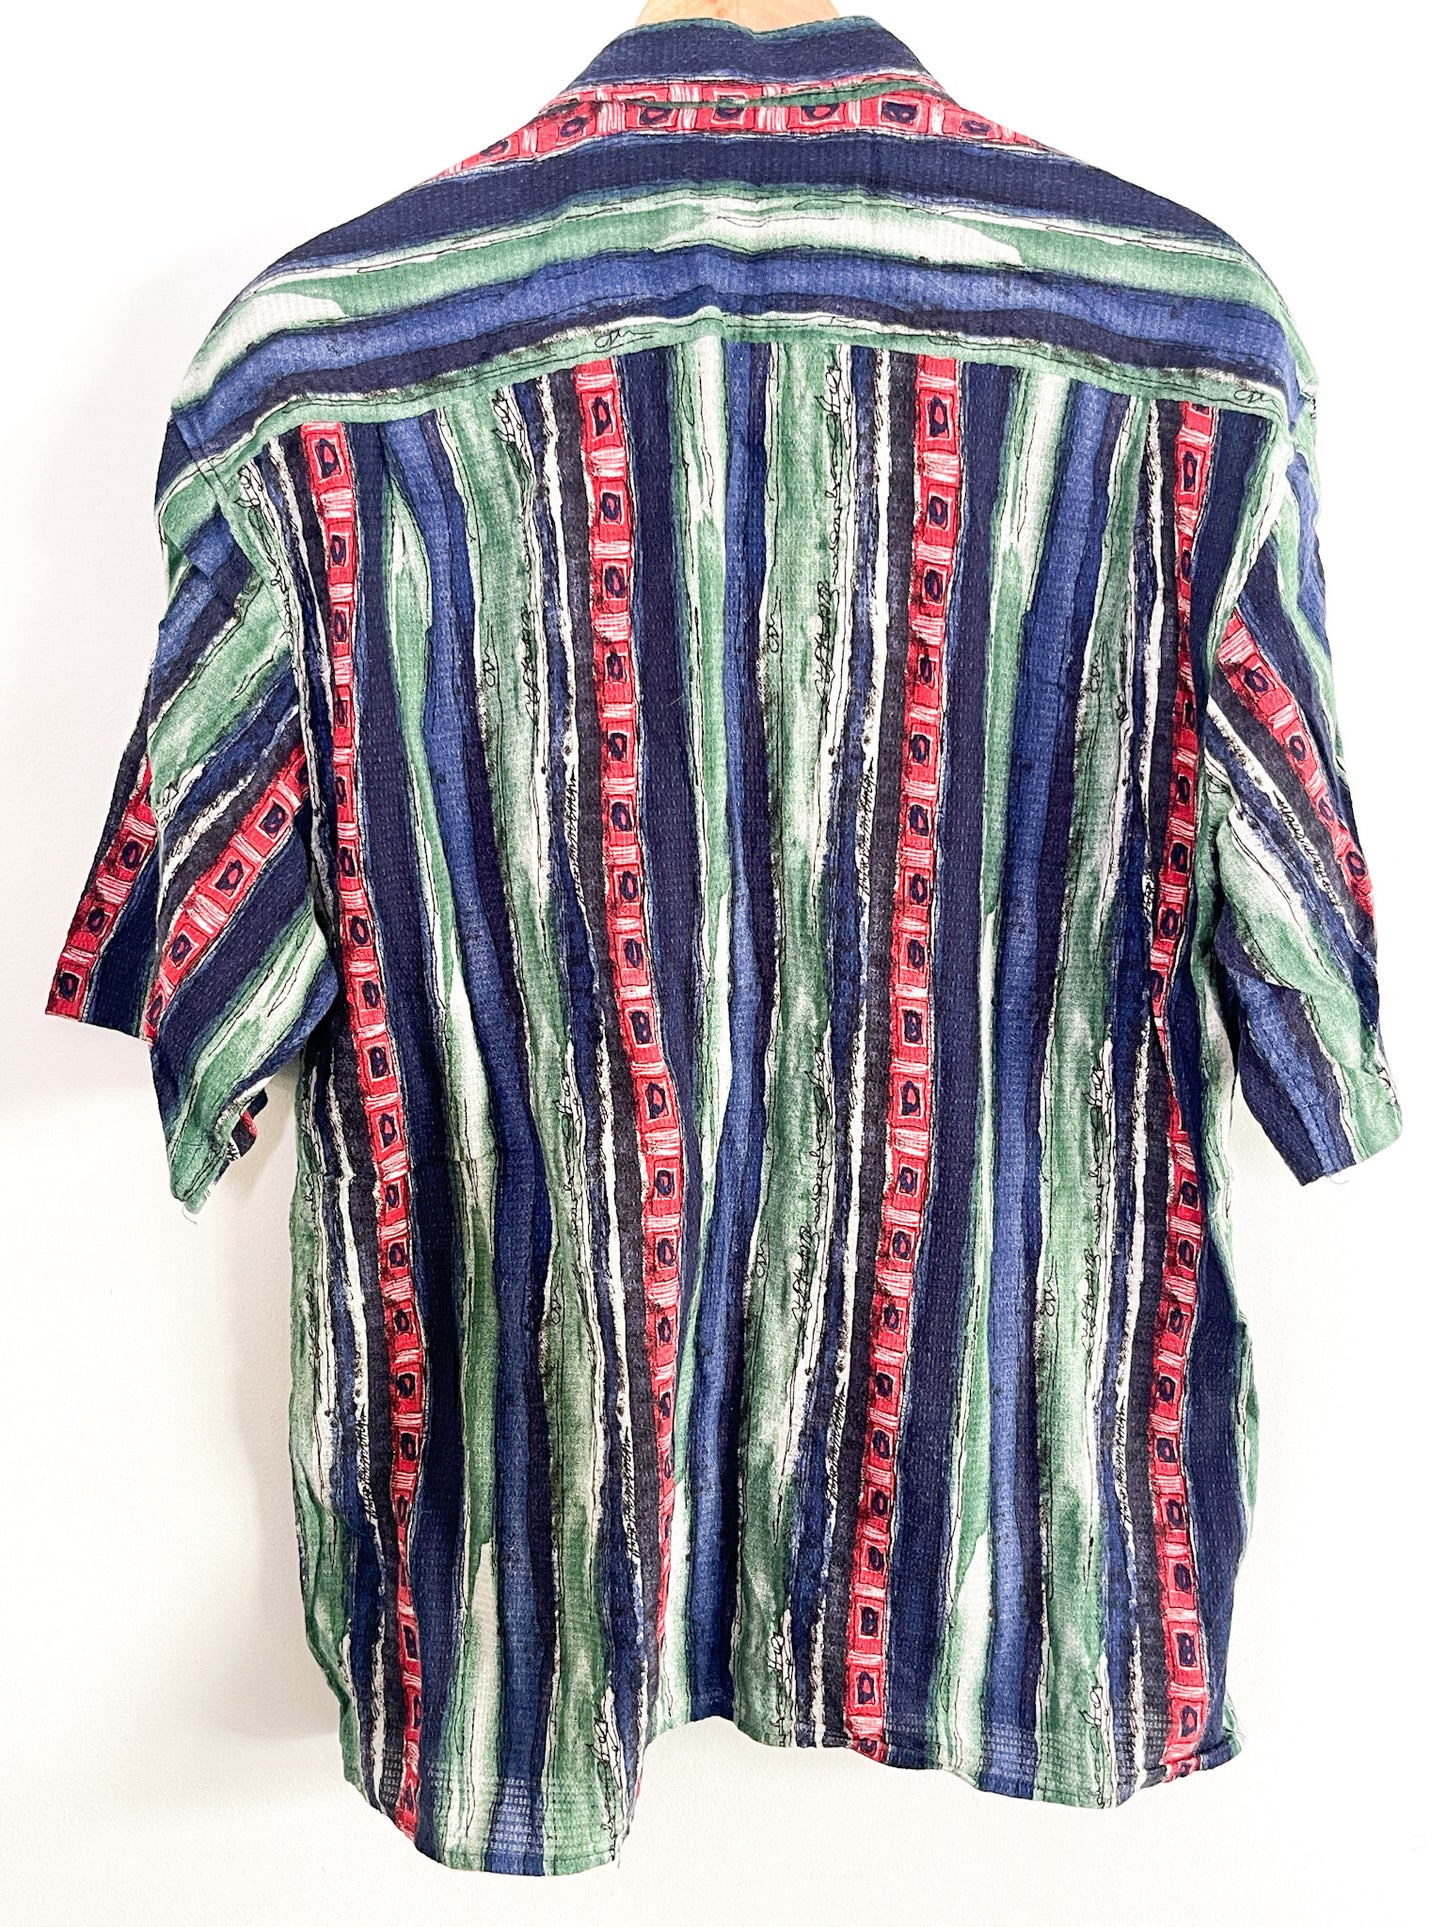 Vintage Tony D. Shirts | Vintage Striped Abstracted Printed 1990s Short Sleeved Mens Shirt | Size 42 - 16.5